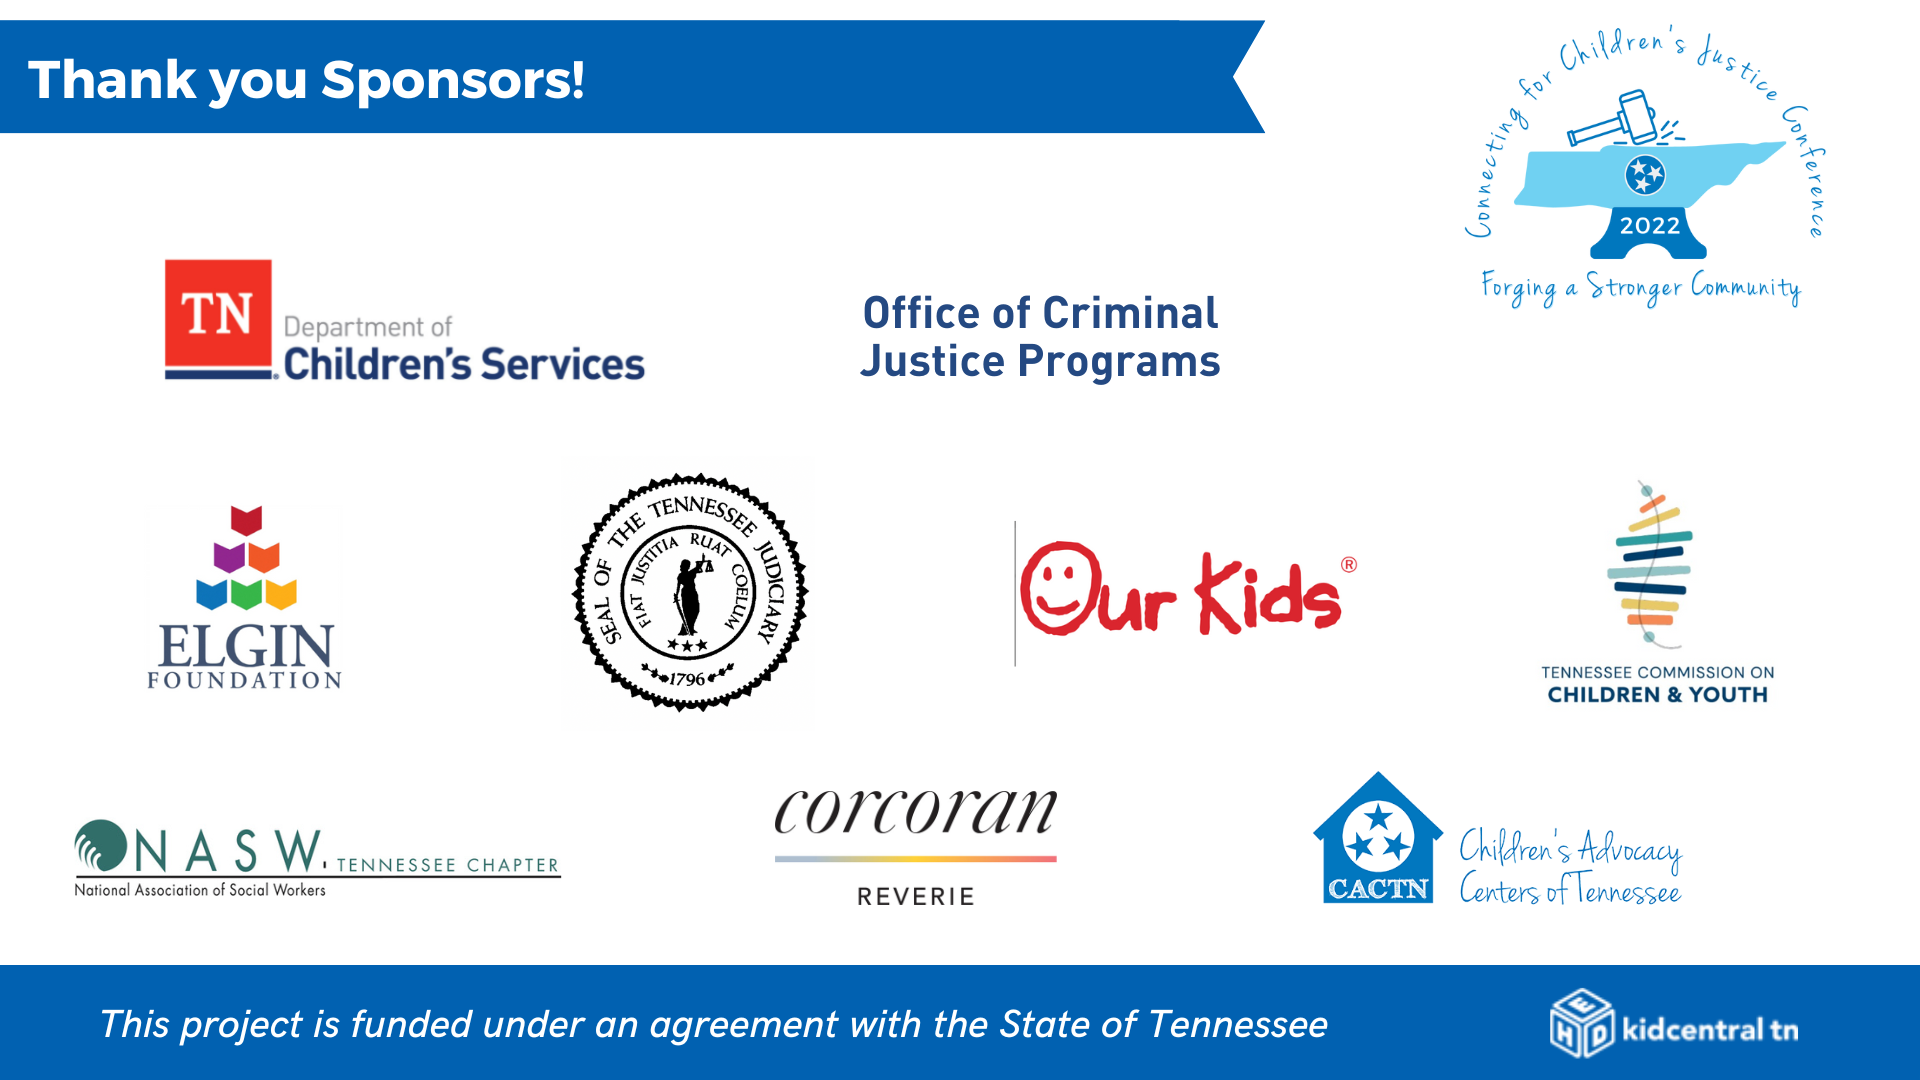 CCJ Children's Advocacy Centers of Tennessee